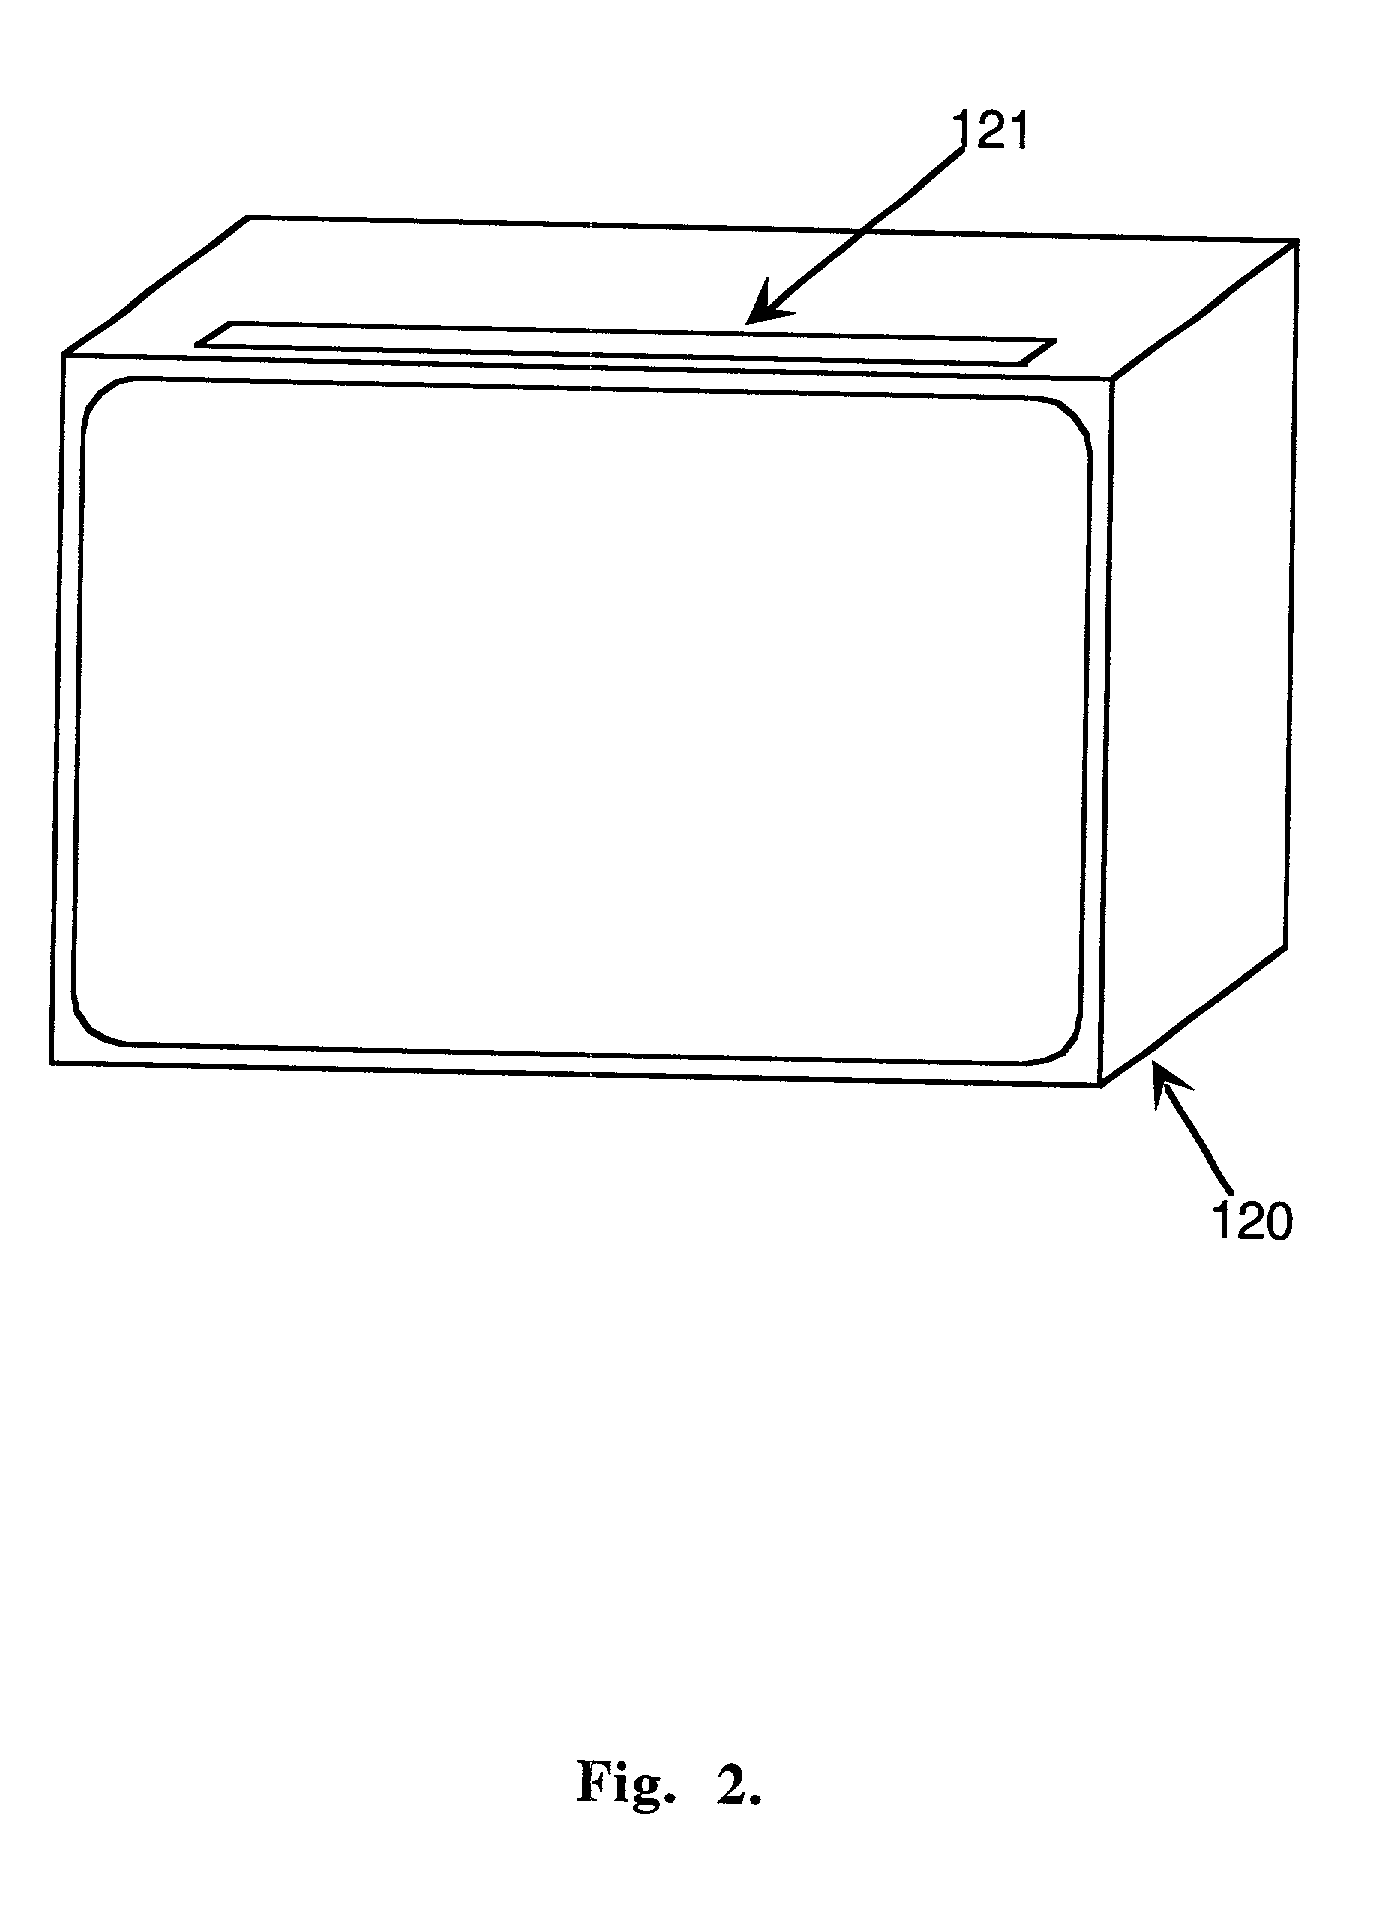 Video display apparatus with separate display means for textual information